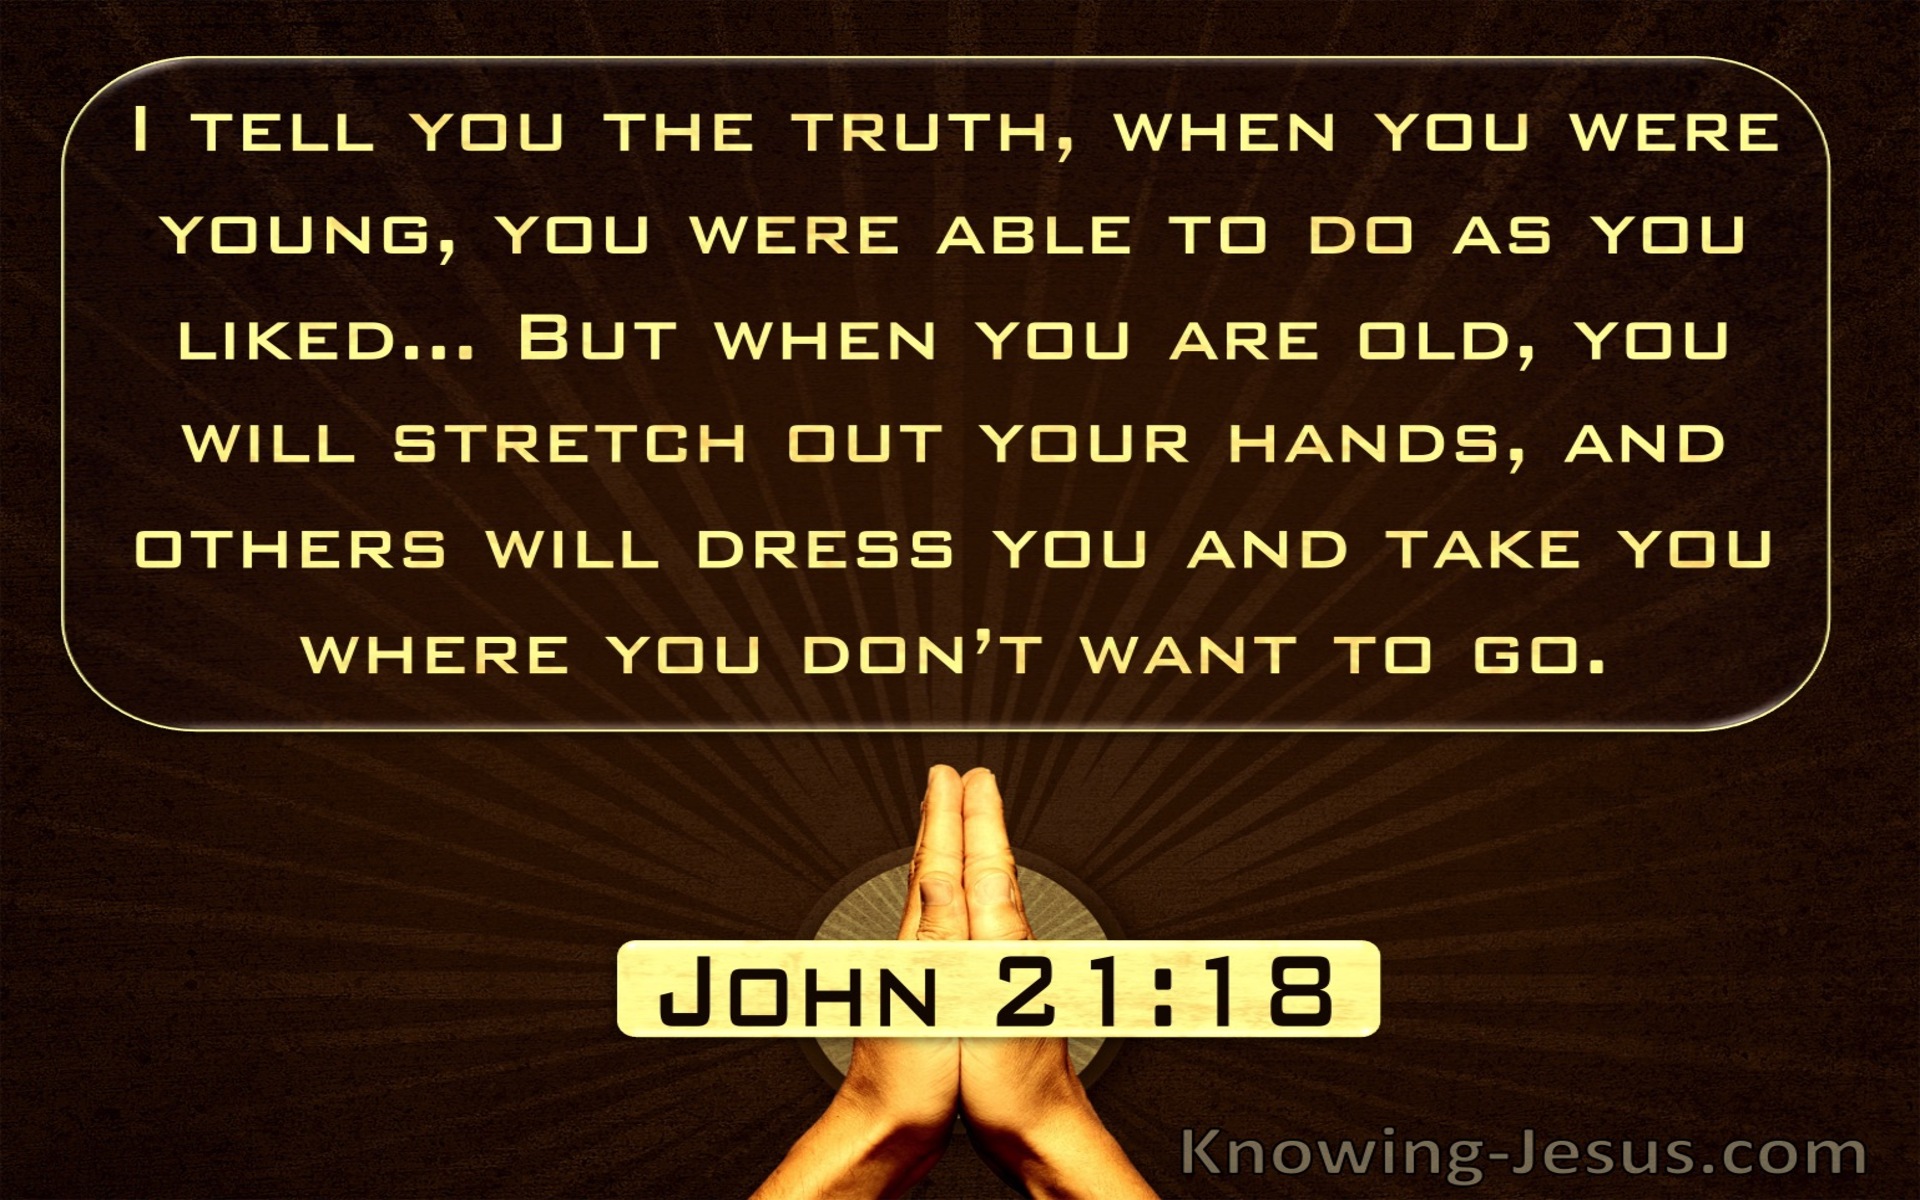 John 21:18 When You Are Old You Will Stretch Out Your Hands (windows)10:05